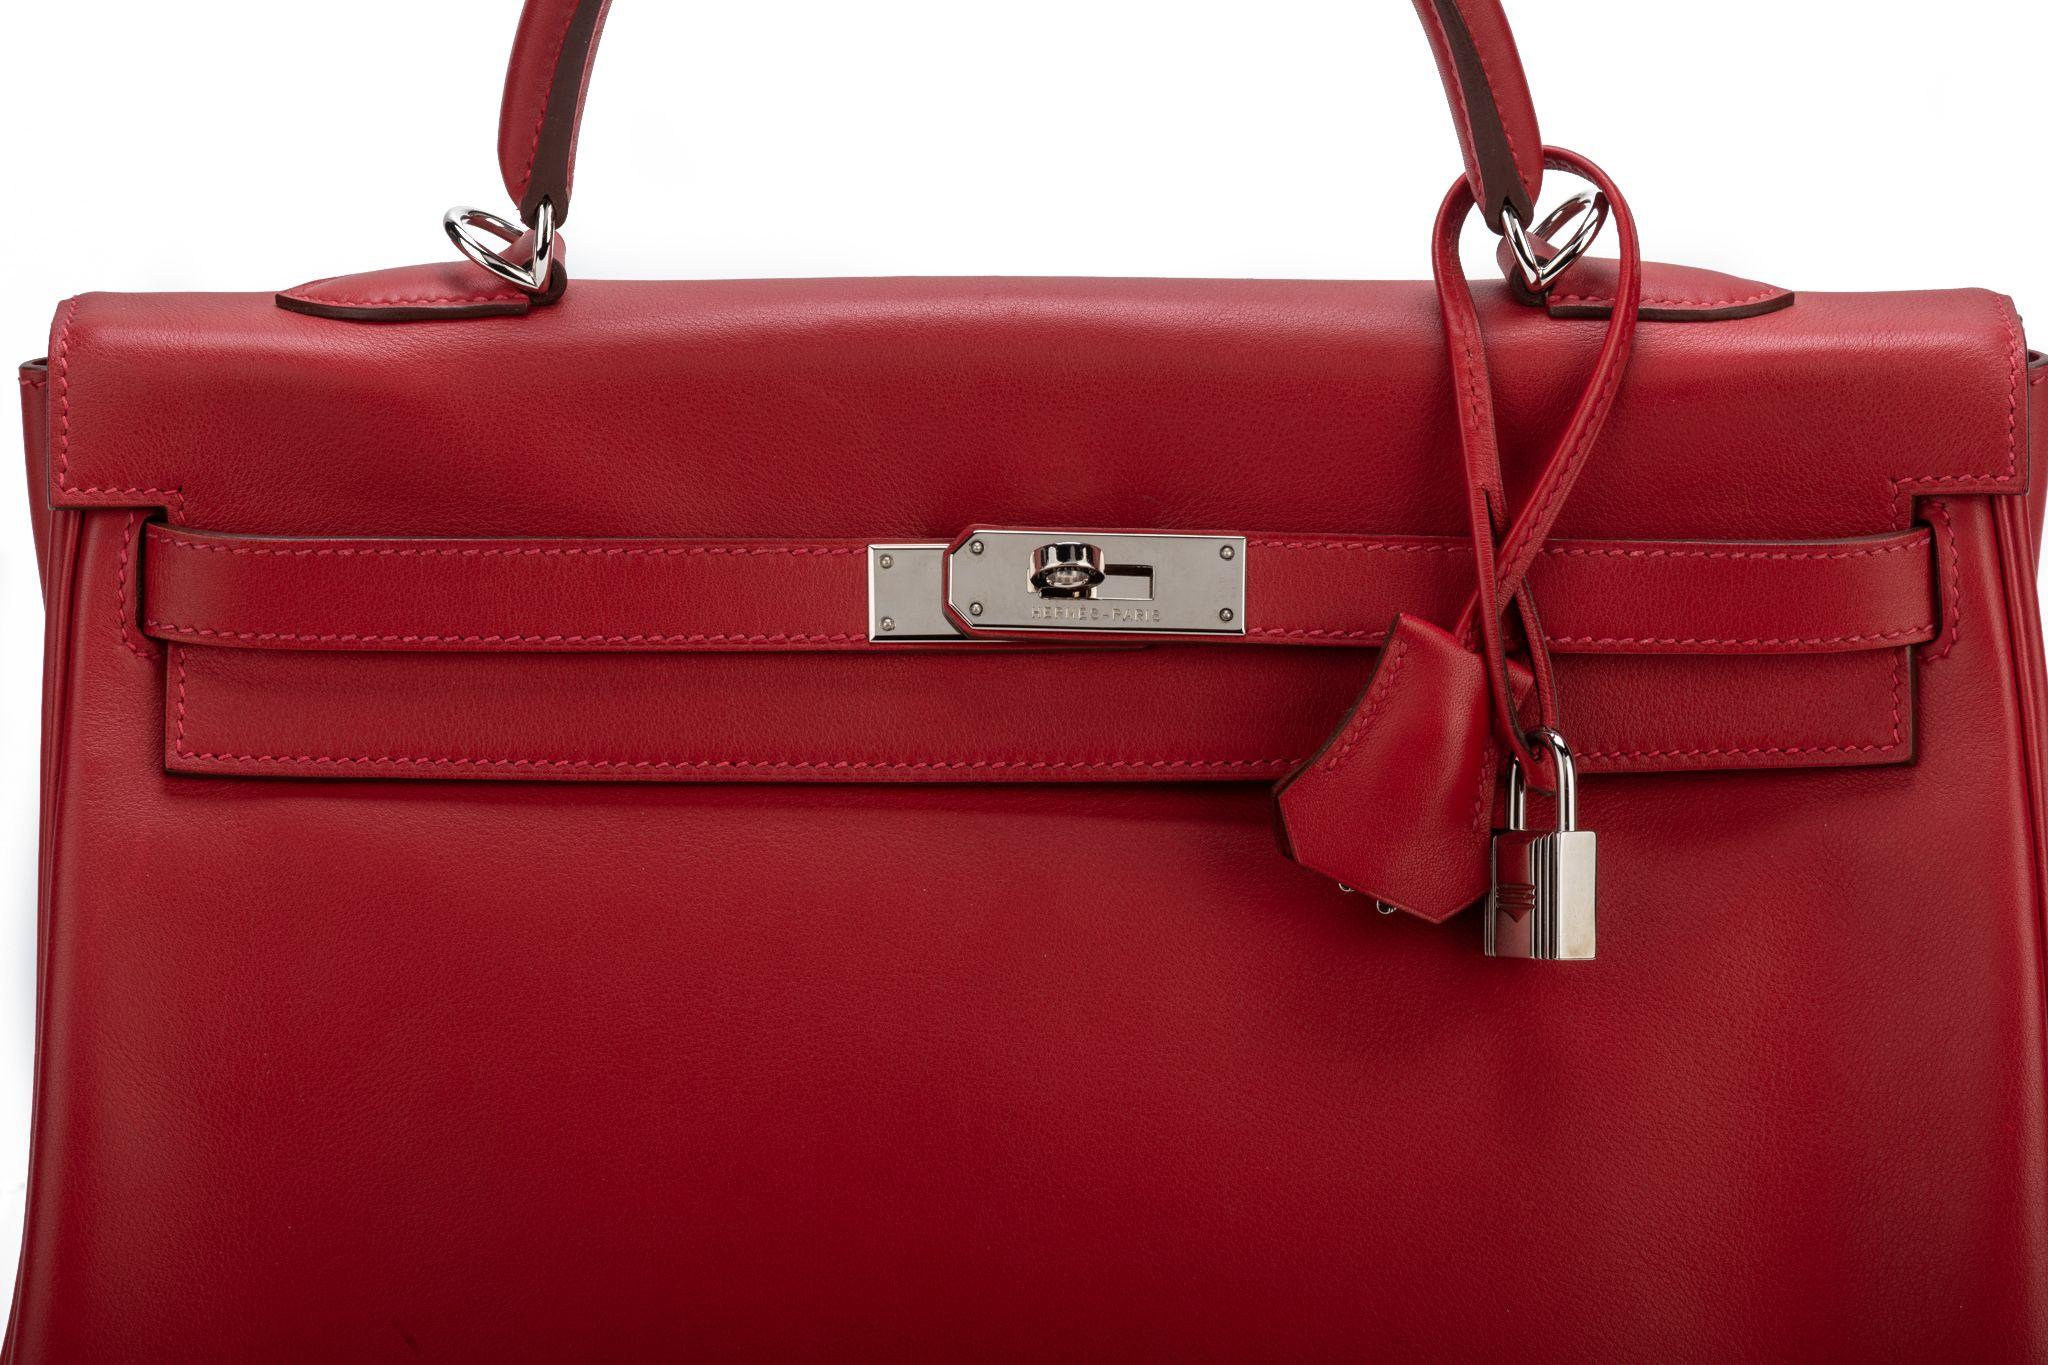 Hermes Kelly 35 Rouge Casaque Swift In Excellent Condition For Sale In West Hollywood, CA